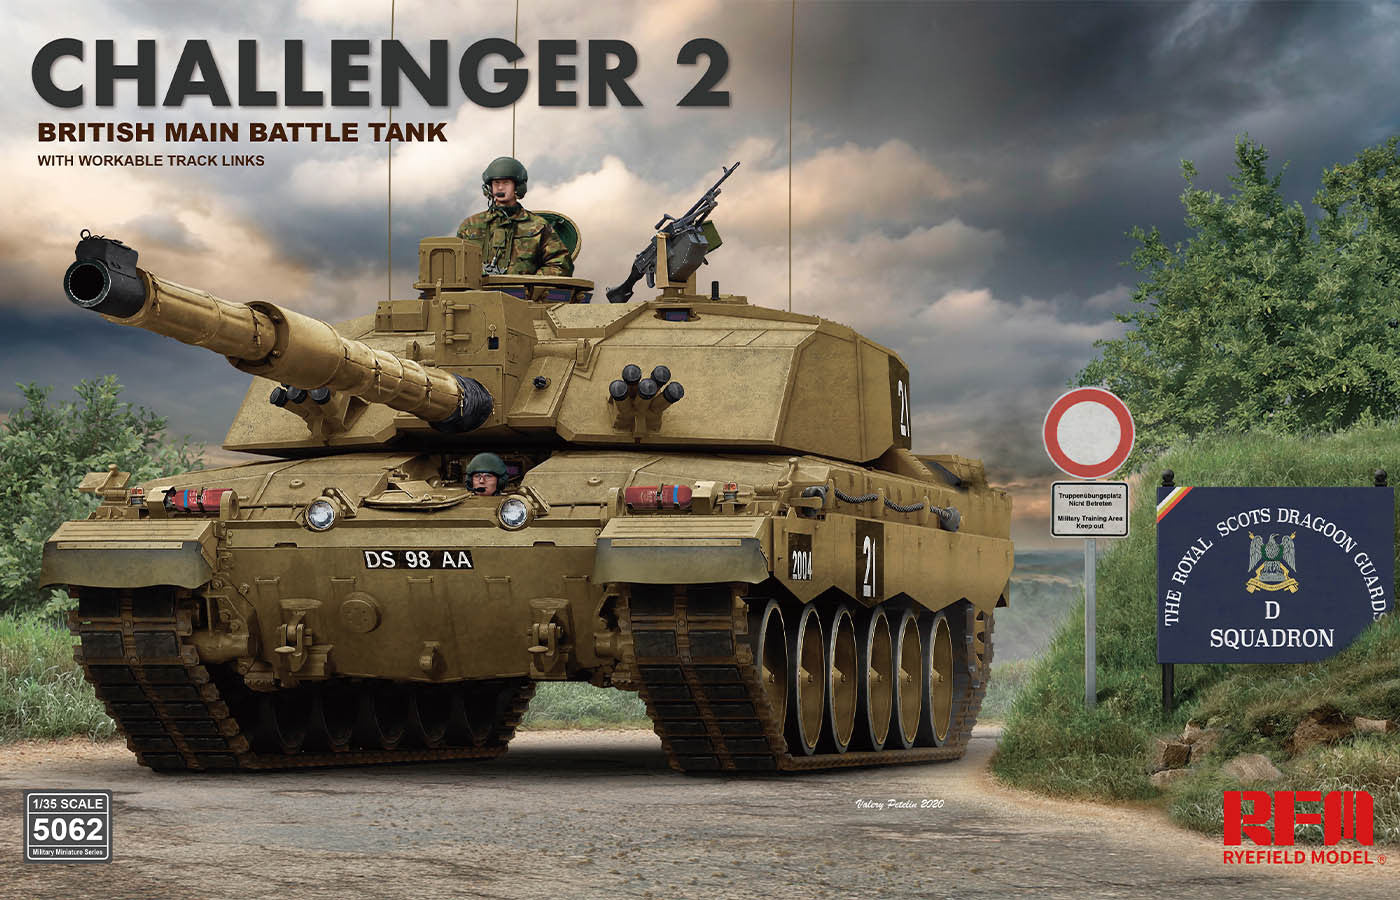 Ryefield Model (RM-5062) 1/35 Challenger 2 (British main battle tank) with workable track links